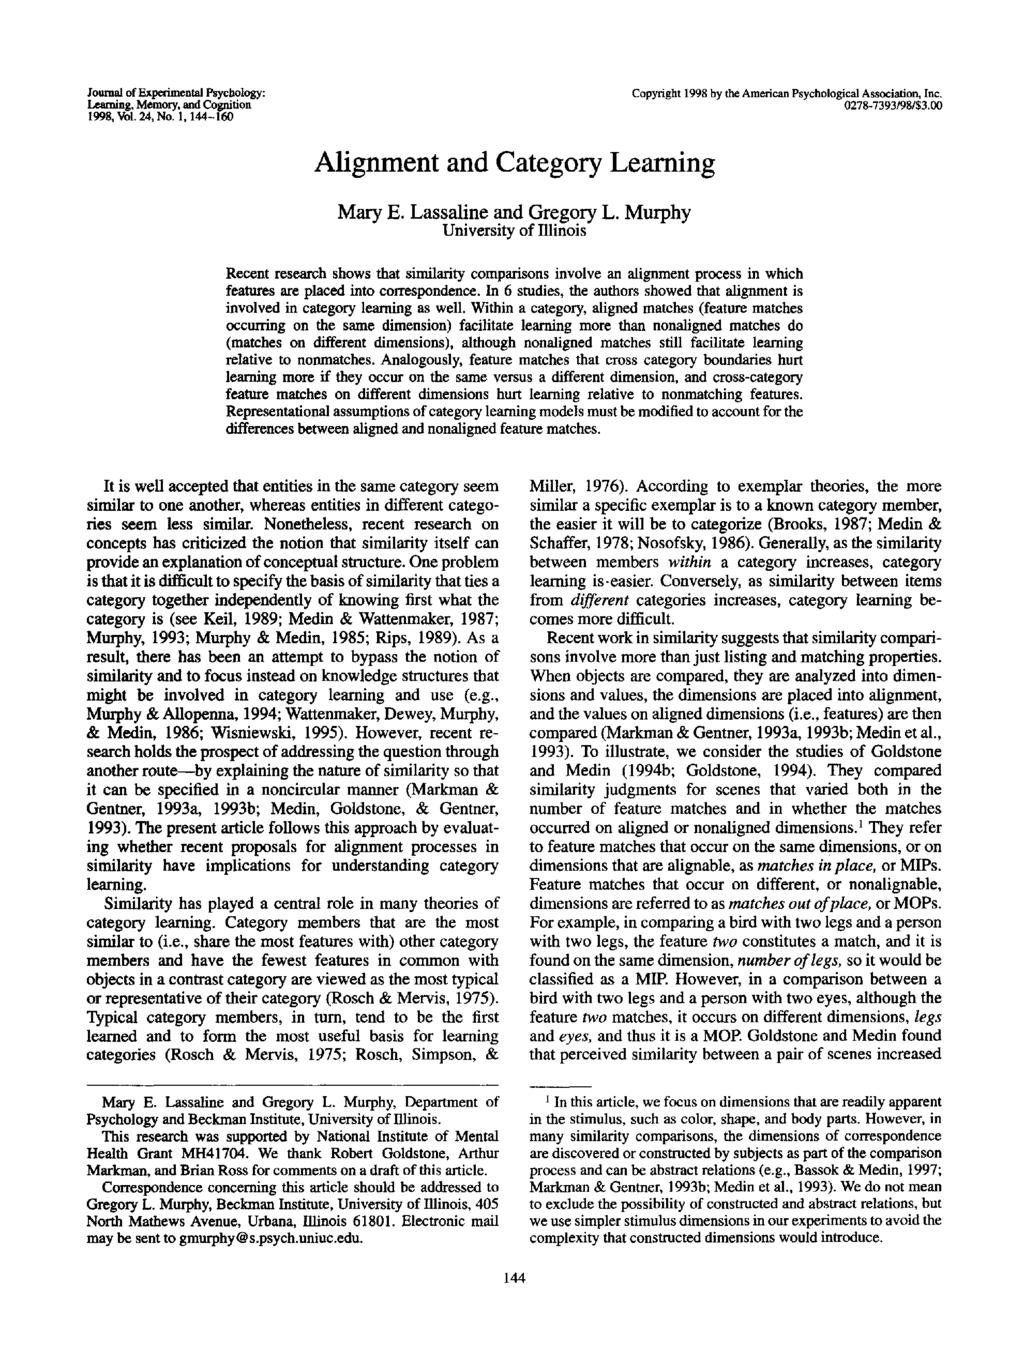 Journal of Experimental Psychology: Learning, Memory, and Cognition 1998, Vol. 24., No. 1,144-160 Alignment and Category Learning Copyright 1998 by the American Psychological Association, Inc.